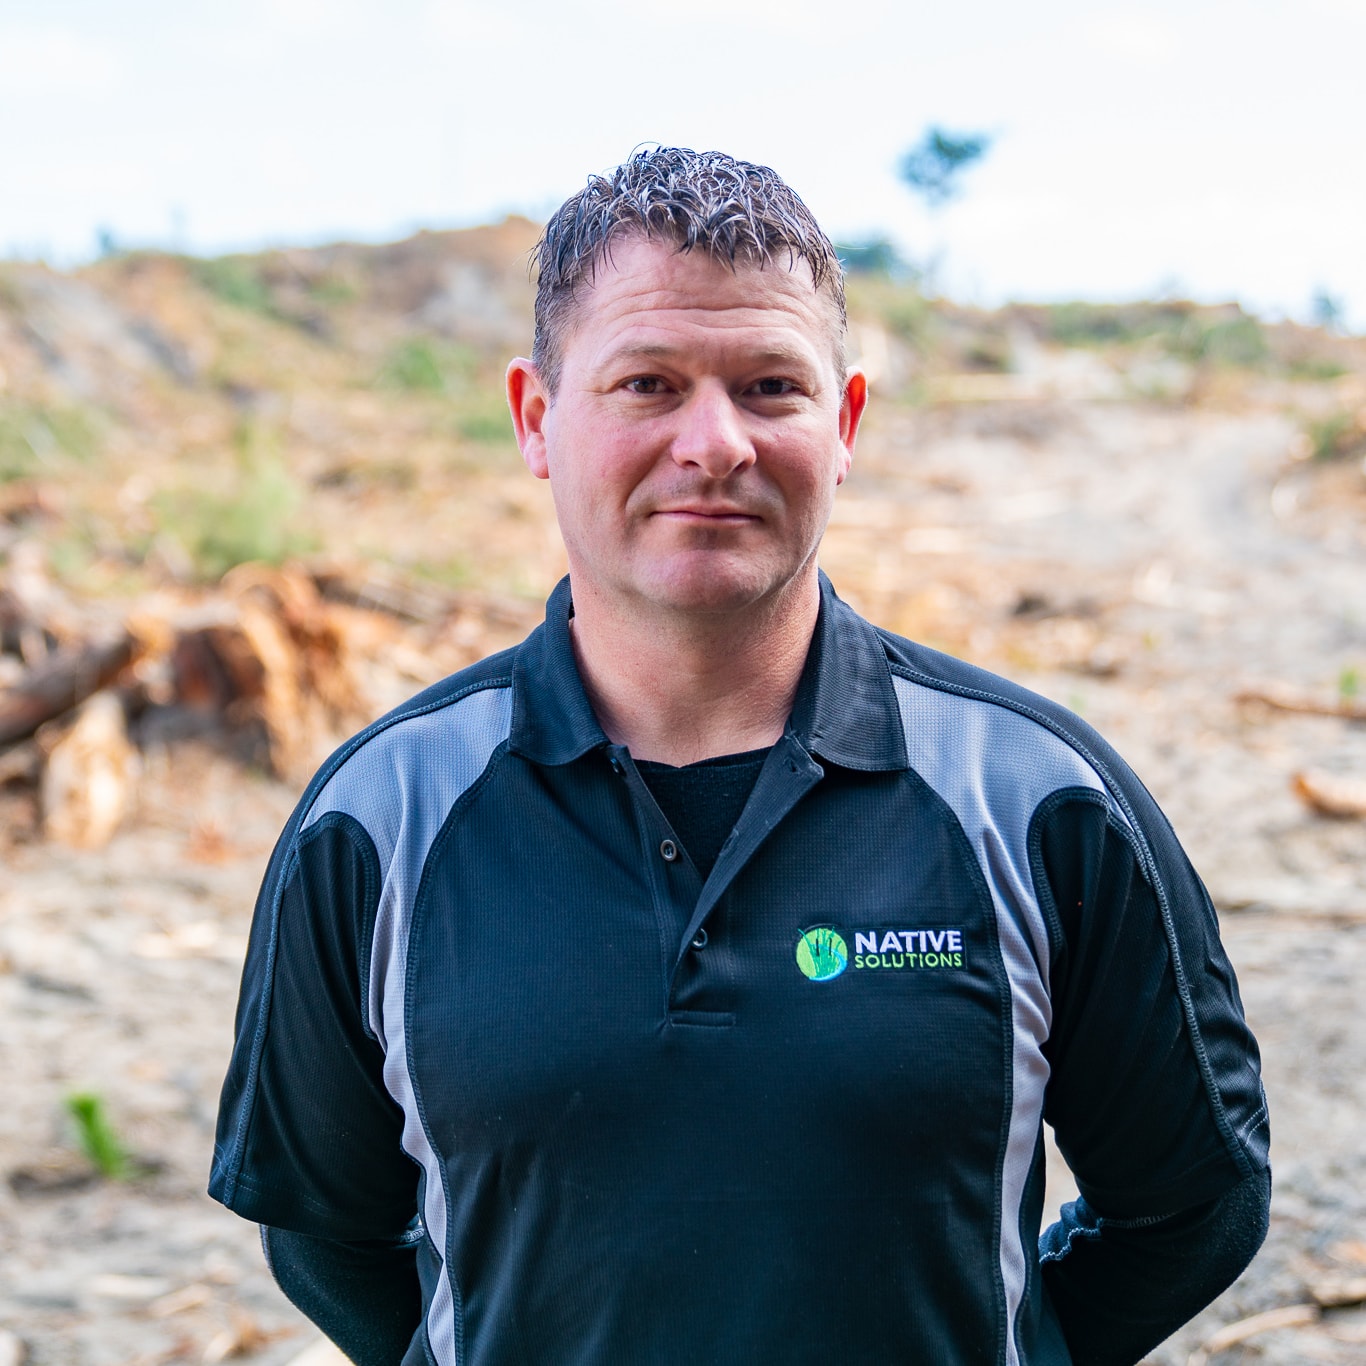 Team member of Native Solutions providing forestry spraying, mulching, and herbicide application services across Marlborough, Canterbury, Christchurch, Kaikoura